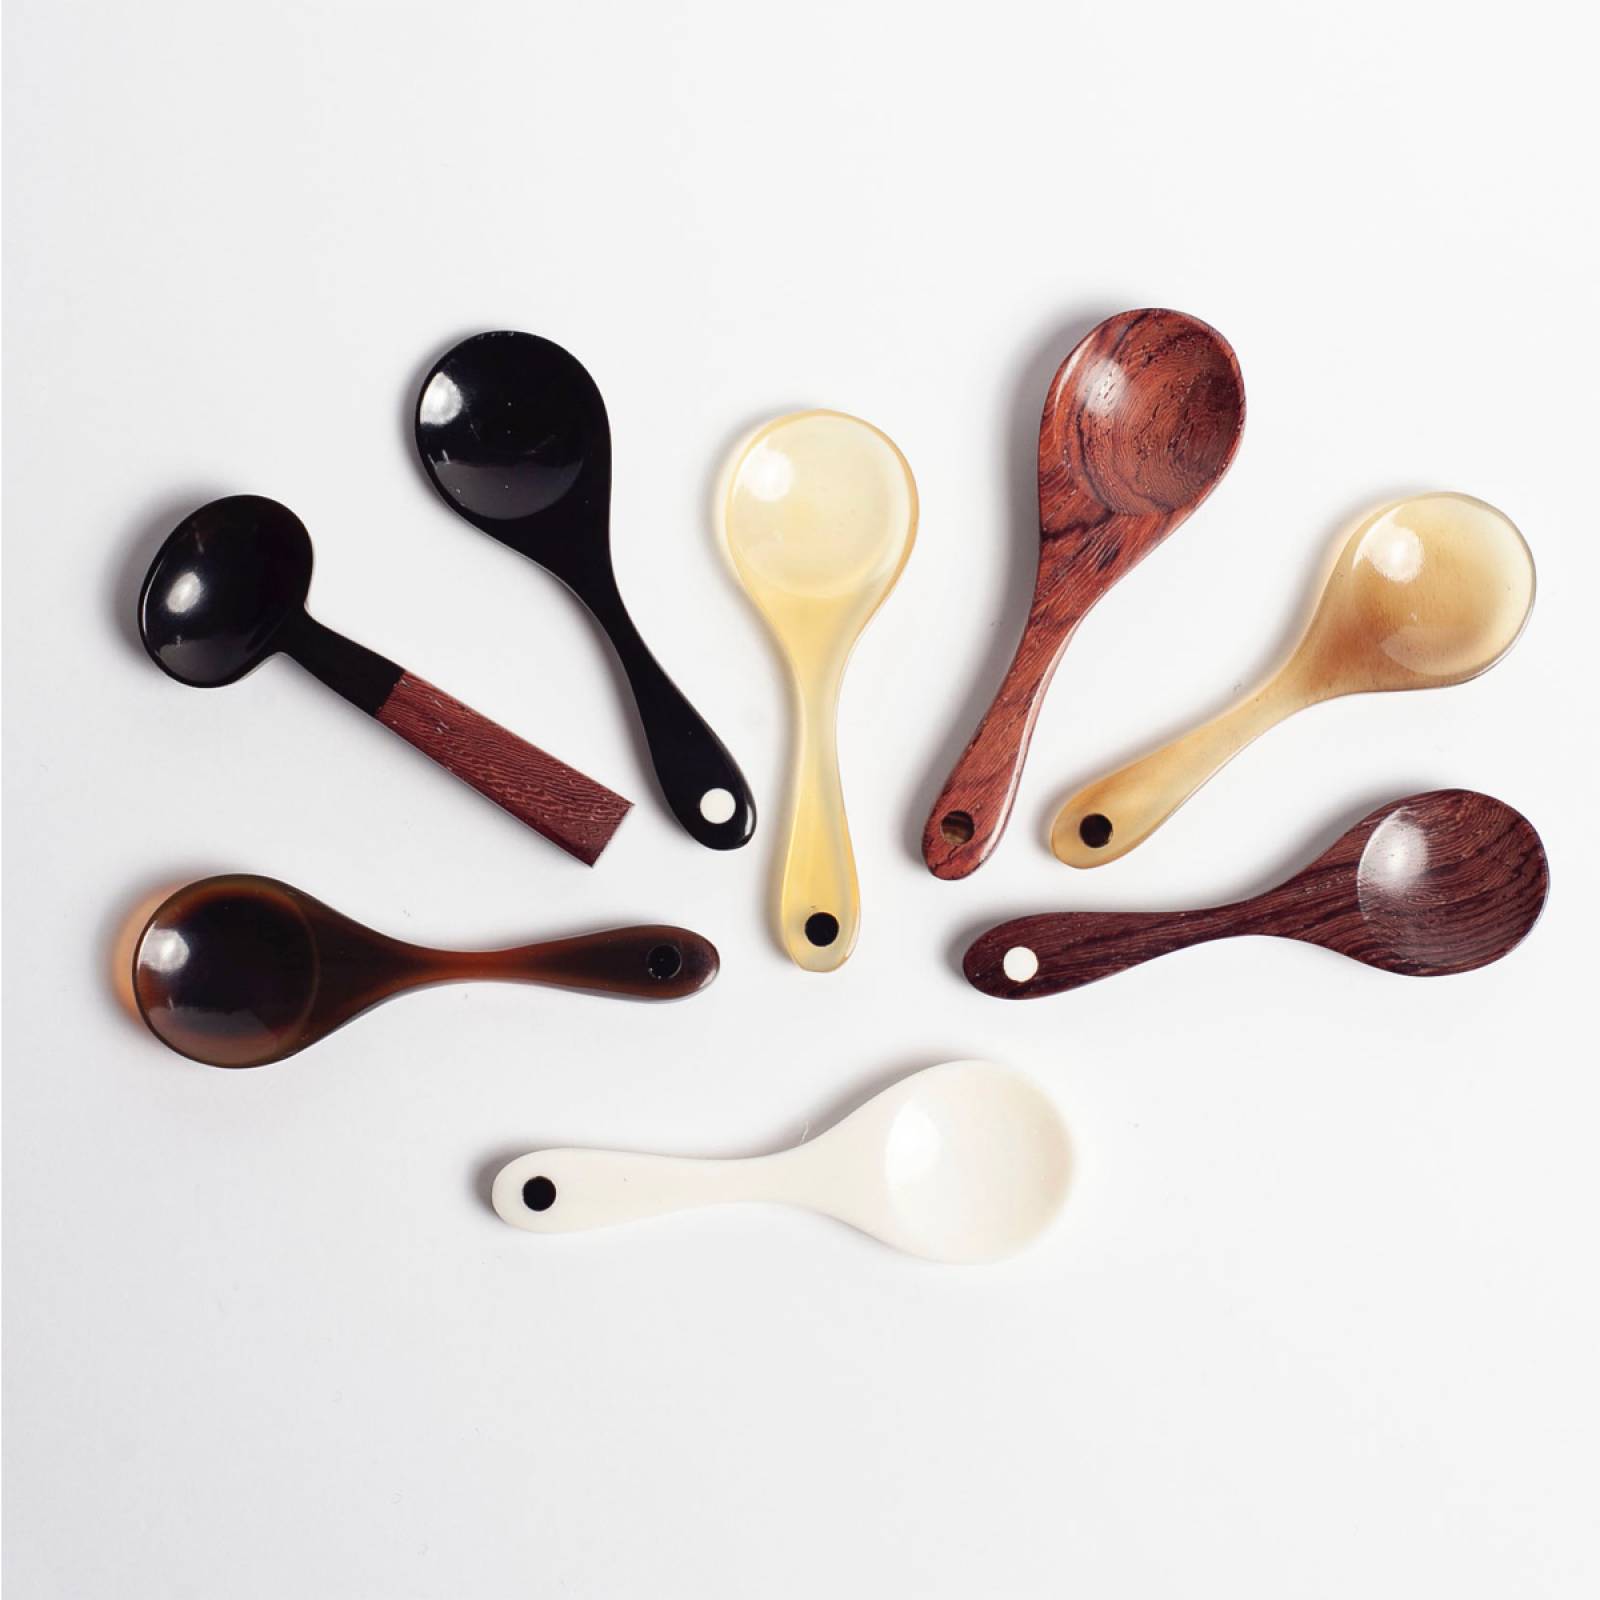 Salt & Pepper Spoon - Rosewood With White Dot thumbnails